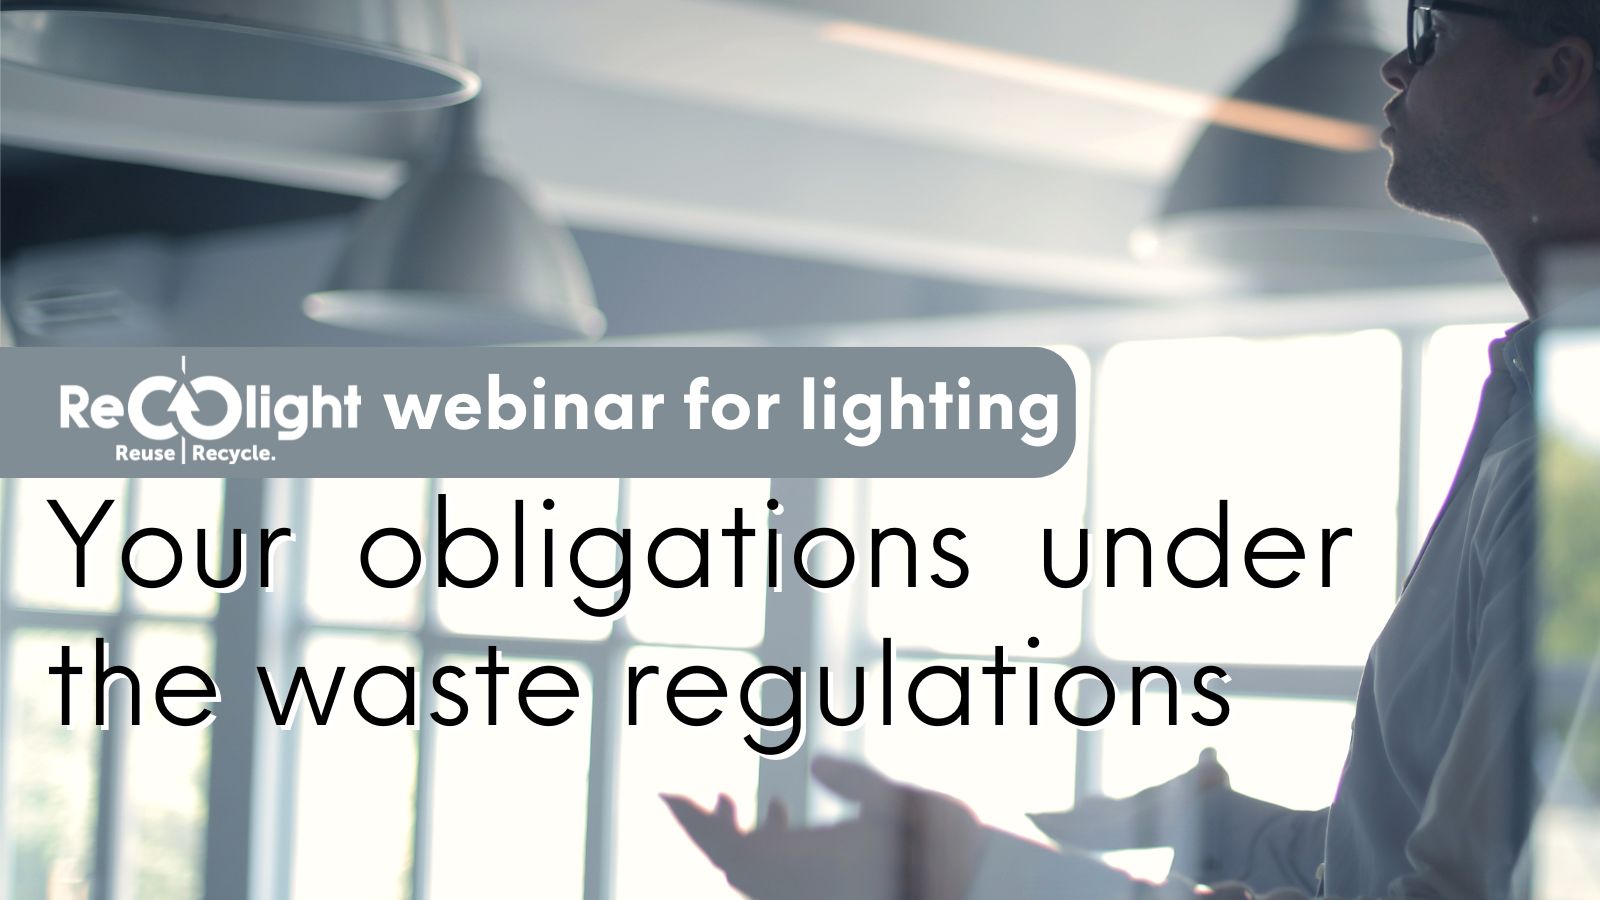 Recolight announces a special webinar for the lighting industry: Your obligations under the waste regs